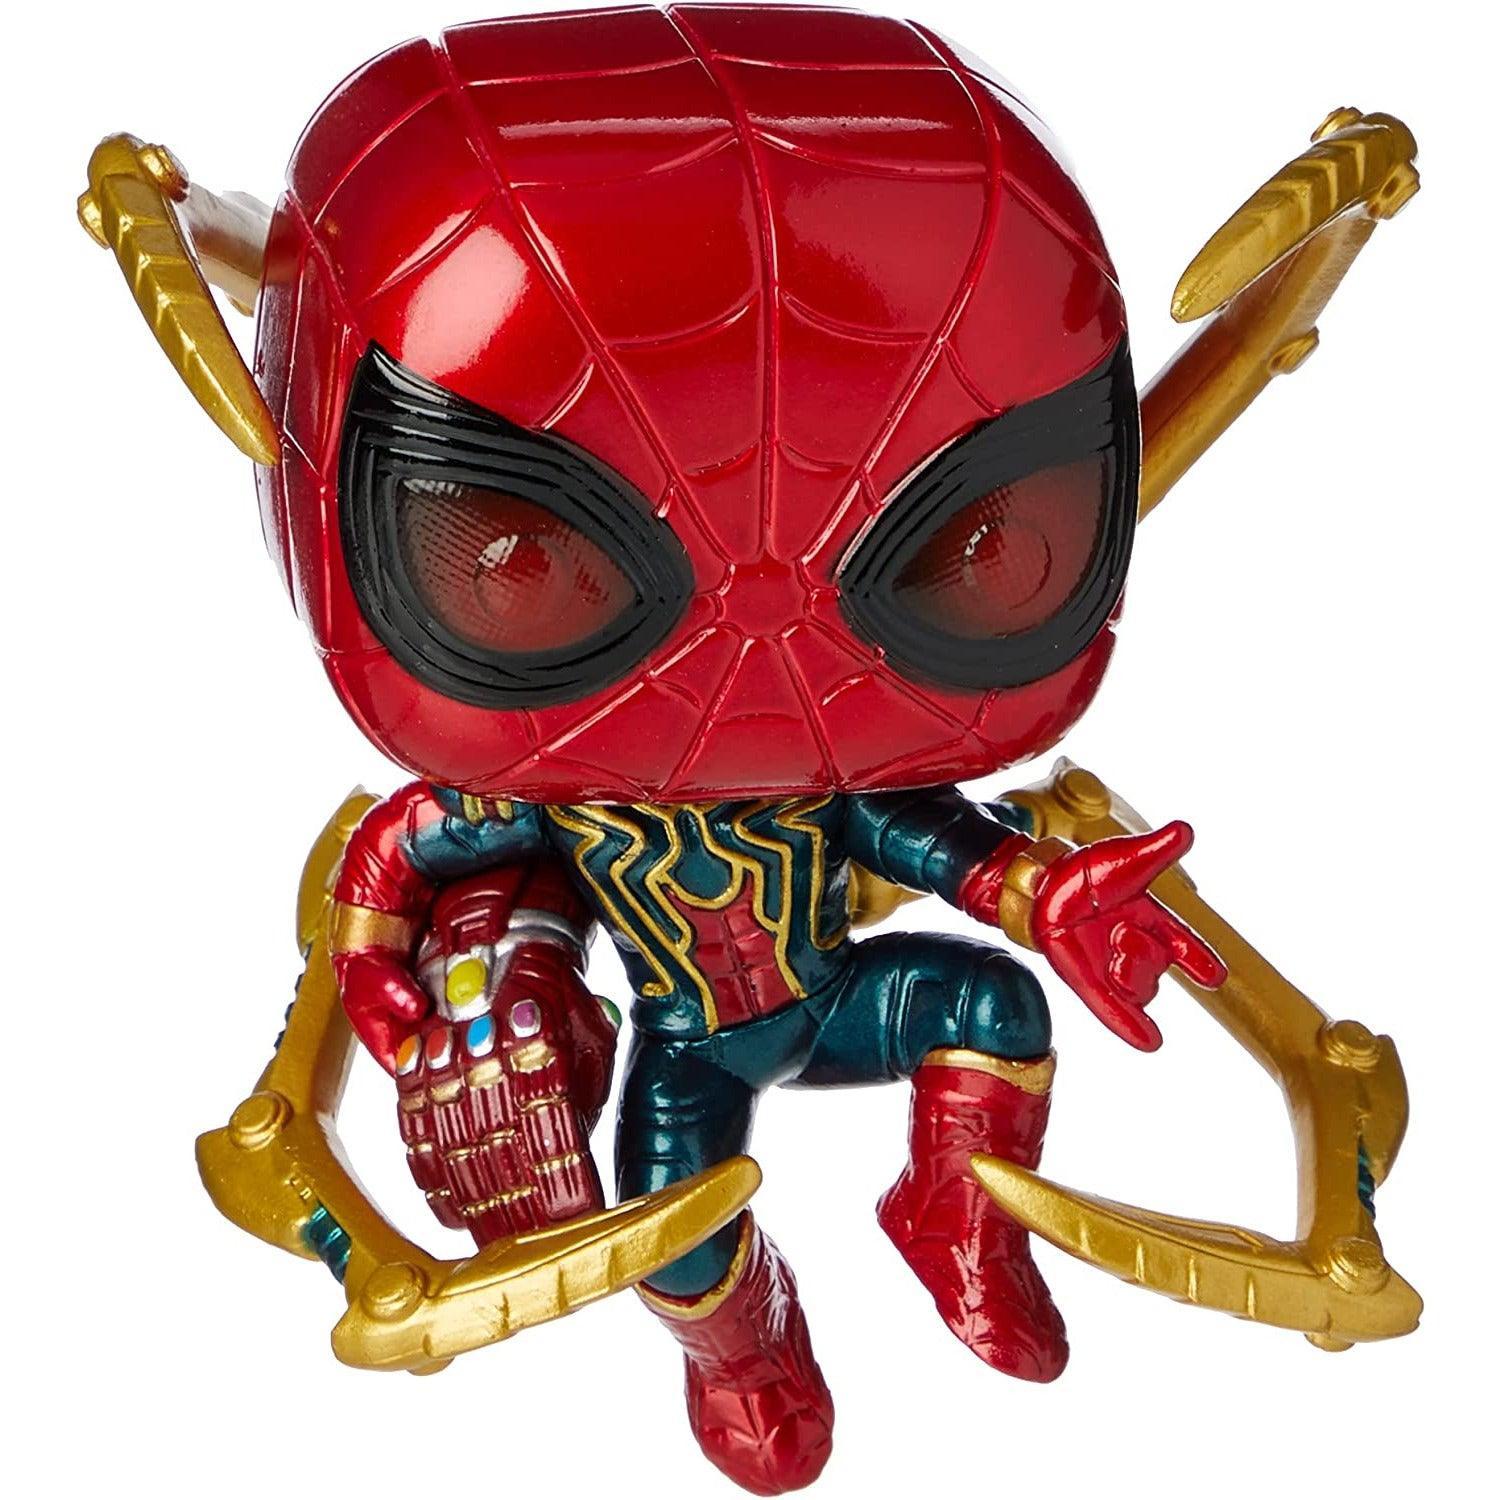 Funko Pop! Marvel Avengers Endgame - Iron Spider with Nano Gauntlet - BumbleToys - 18+, 4+ Years, 5-7 Years, Action Figures, Avengers, Boys, Characters, Funko, Pre-Order, Spiderman